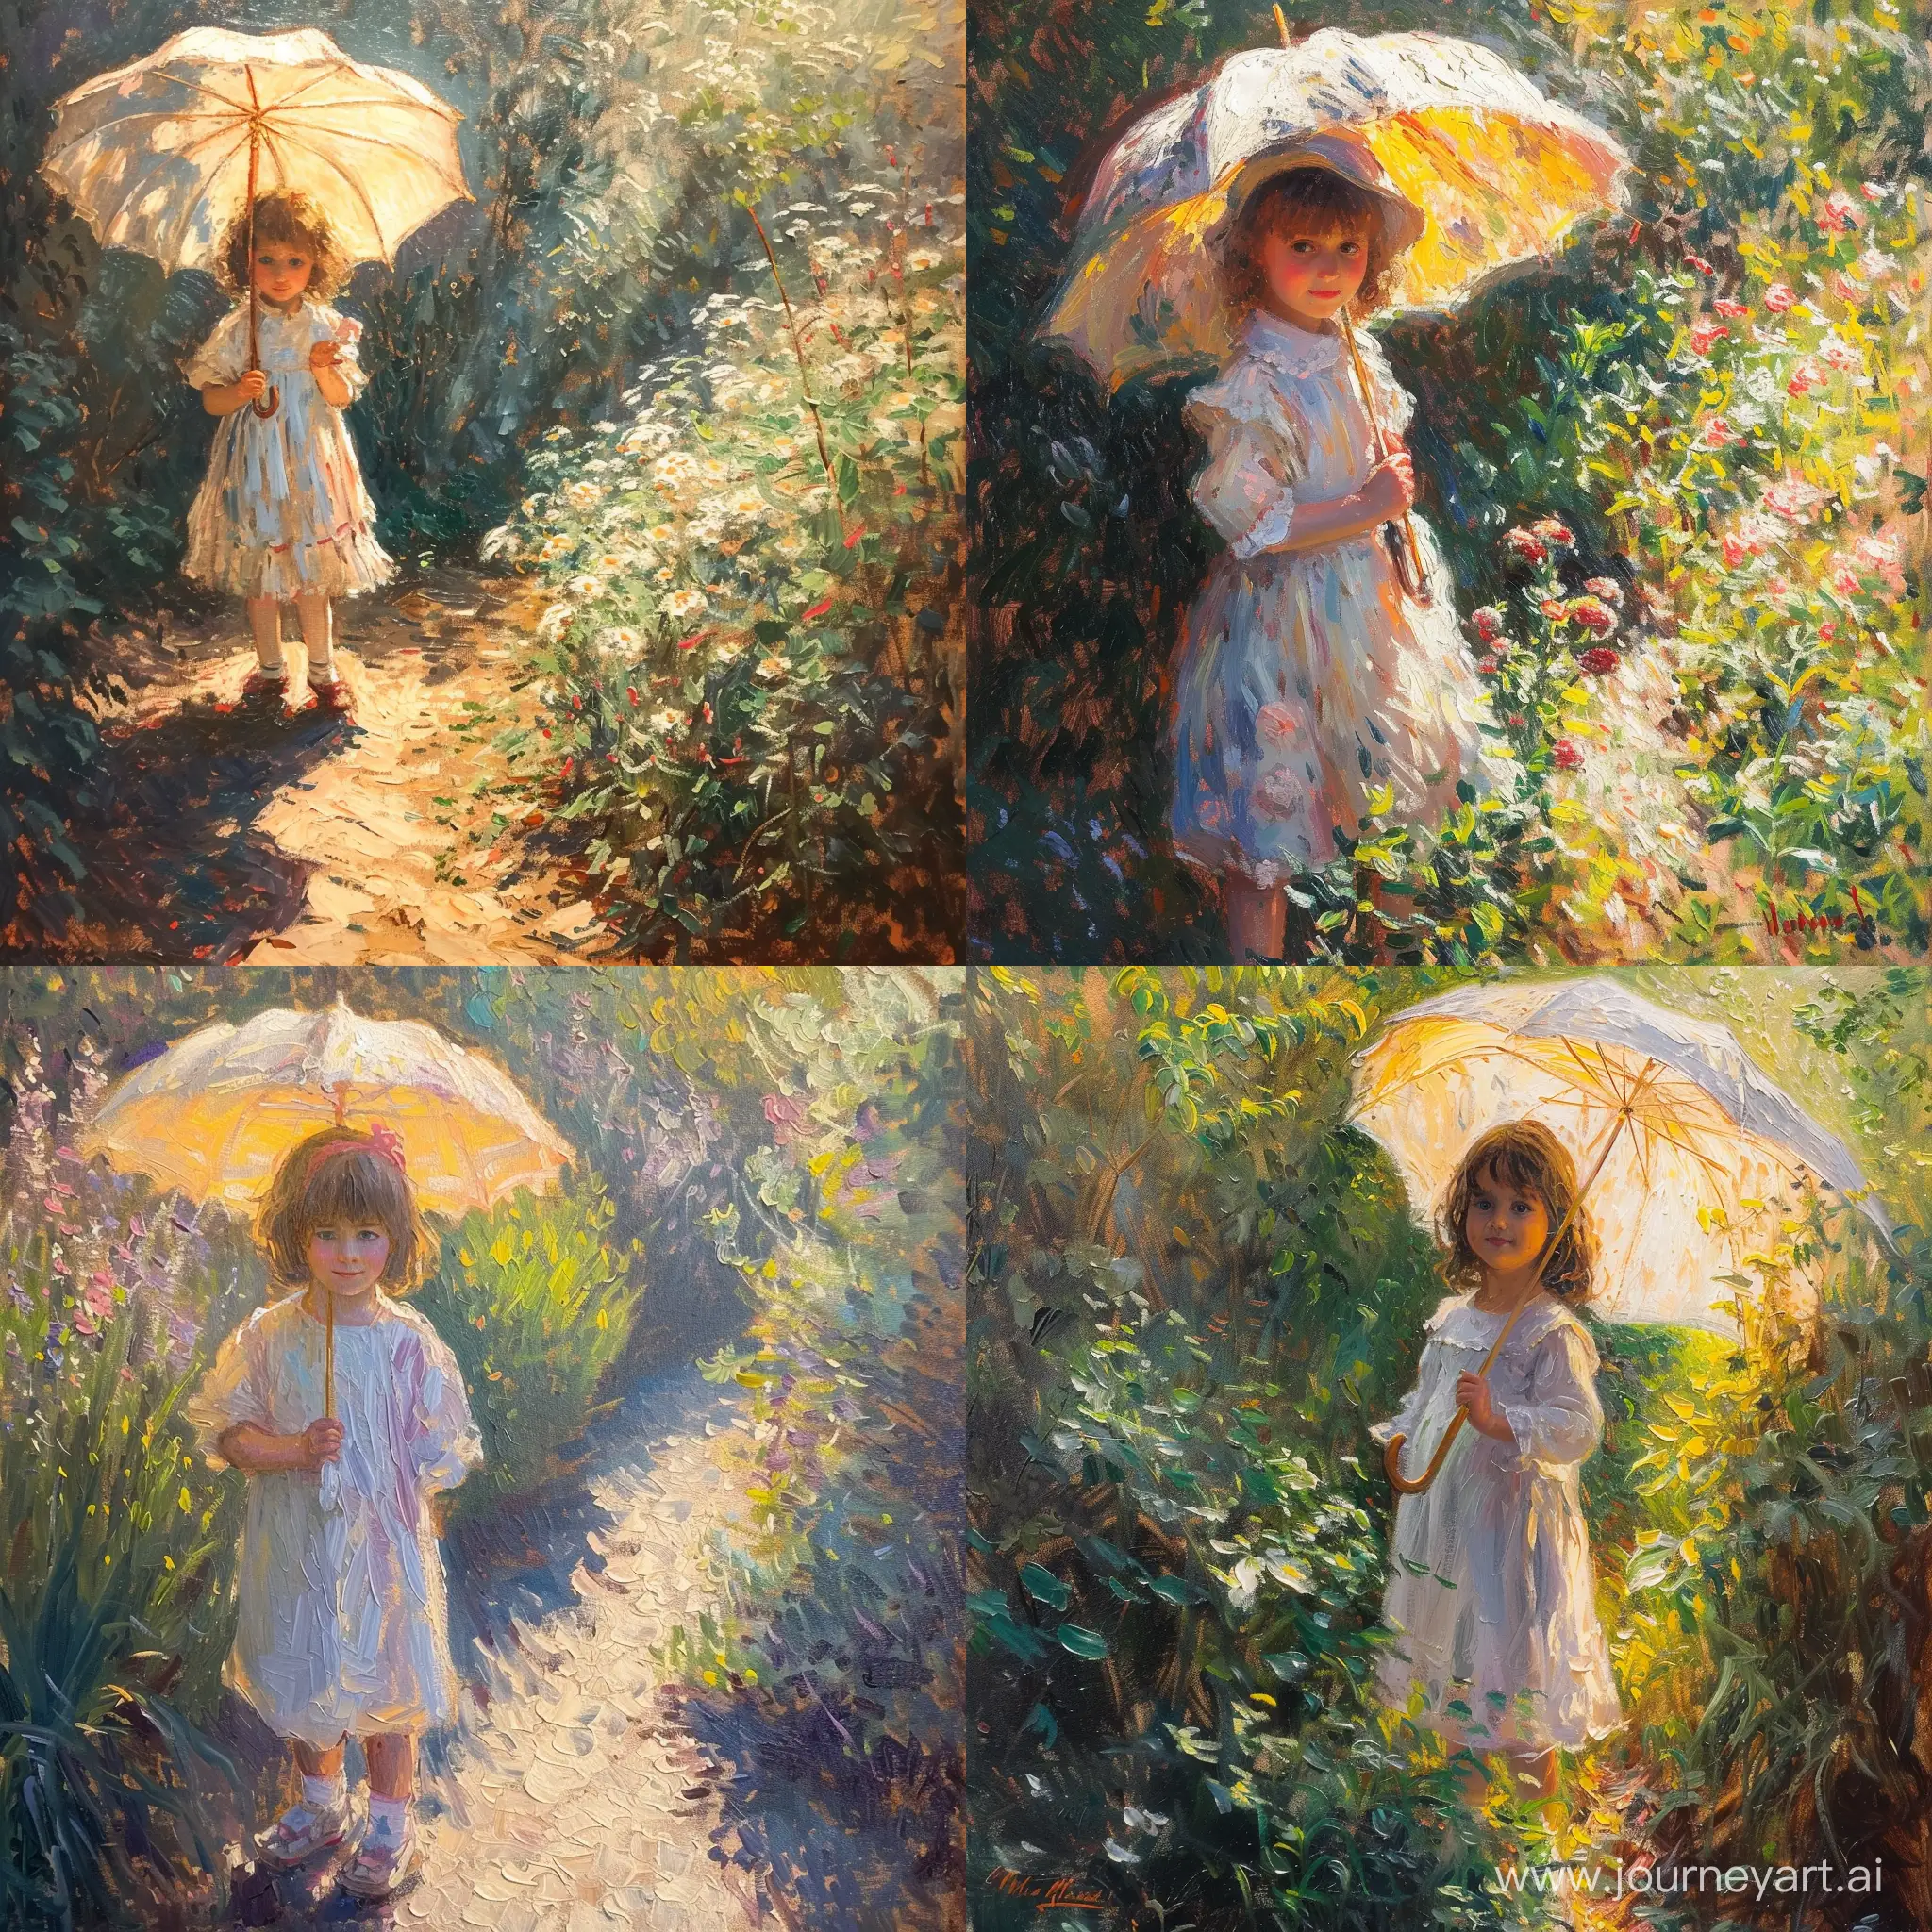 Sunlit-Garden-Portrait-Impressionist-Painting-of-a-Young-Girl-with-Parasol